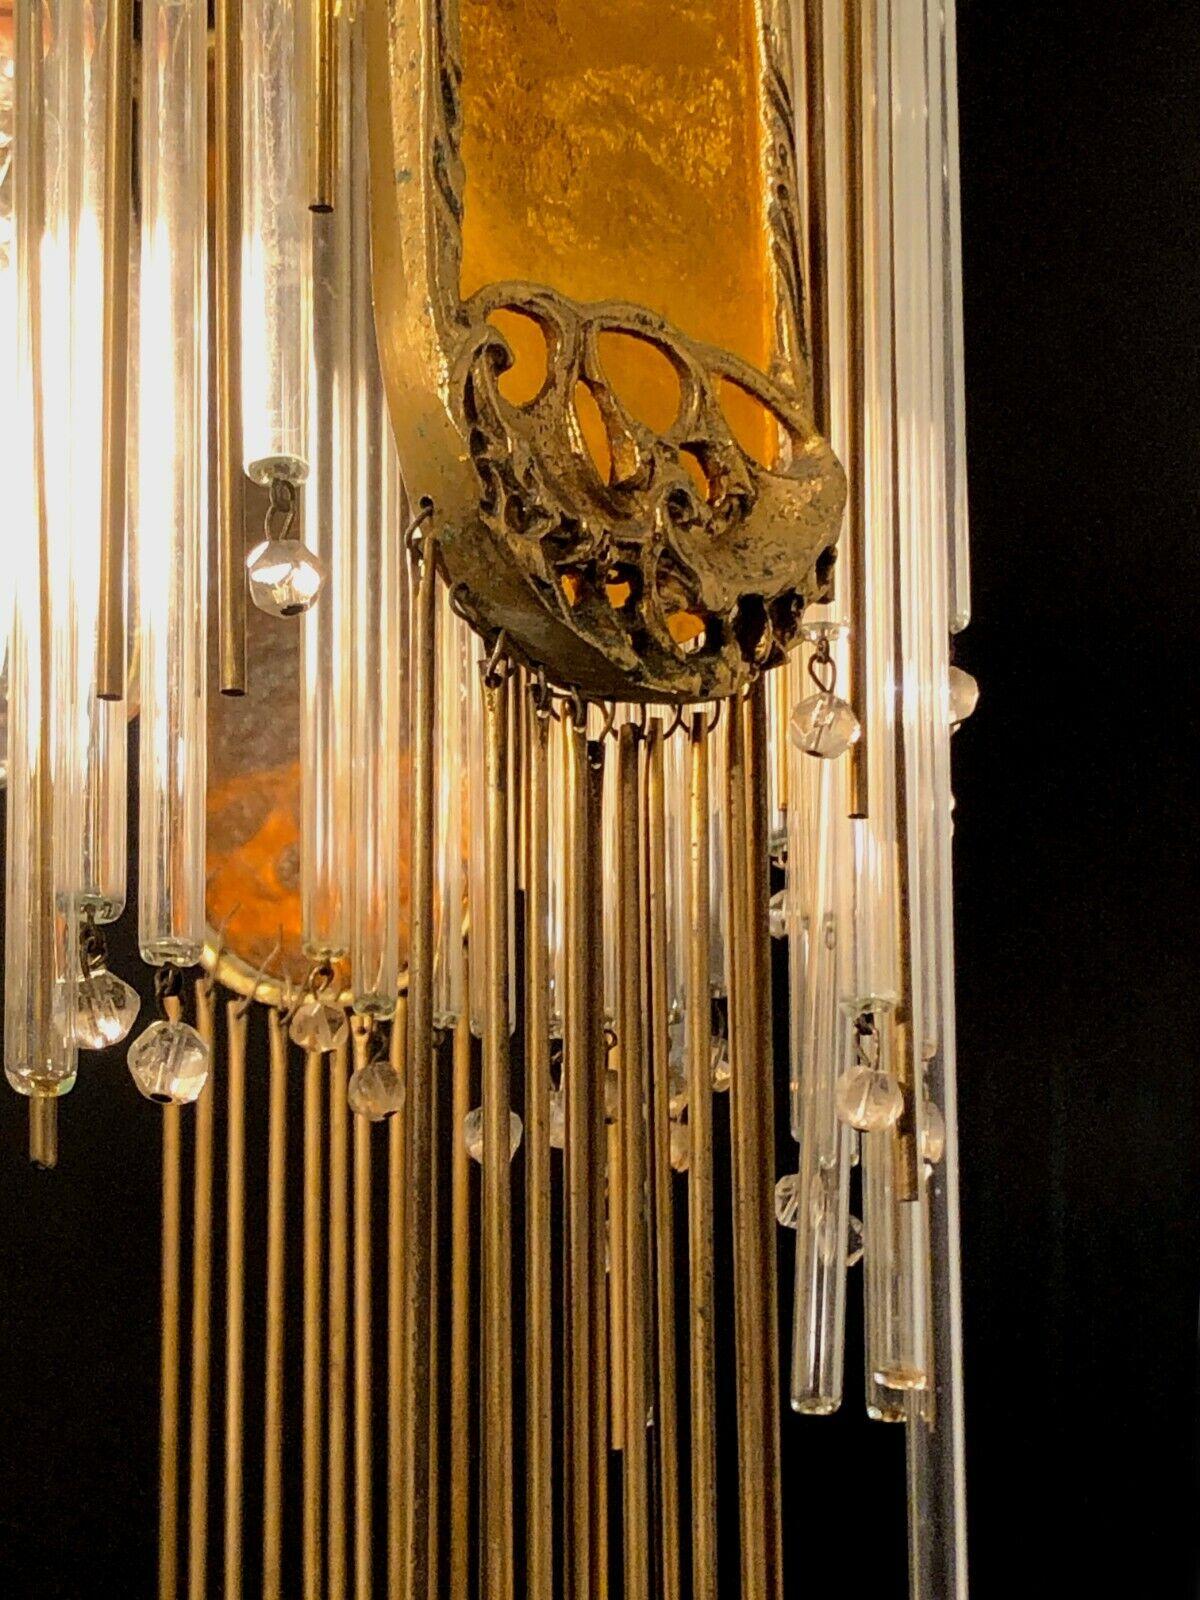 Early 20th Century An ART NOUVEAU Chandelier CEILING FIXTURE by HECTOR GUIMARD, France 1900-1960 For Sale